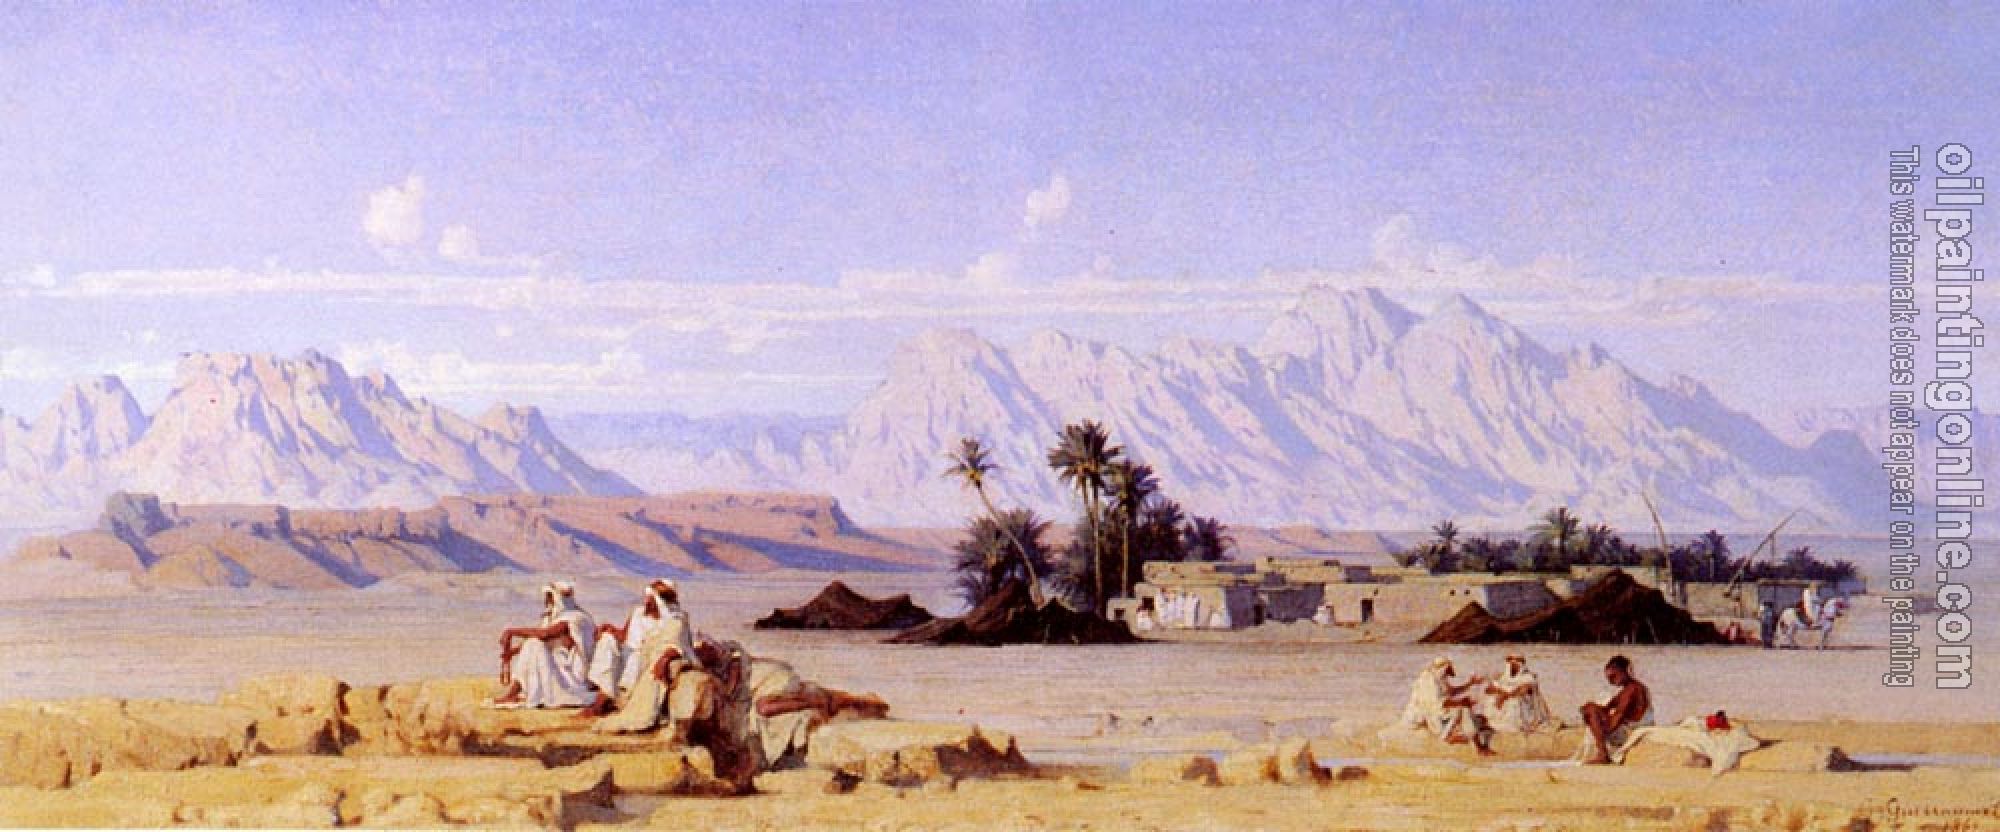 Guillaumet, Gustave - The Oasis